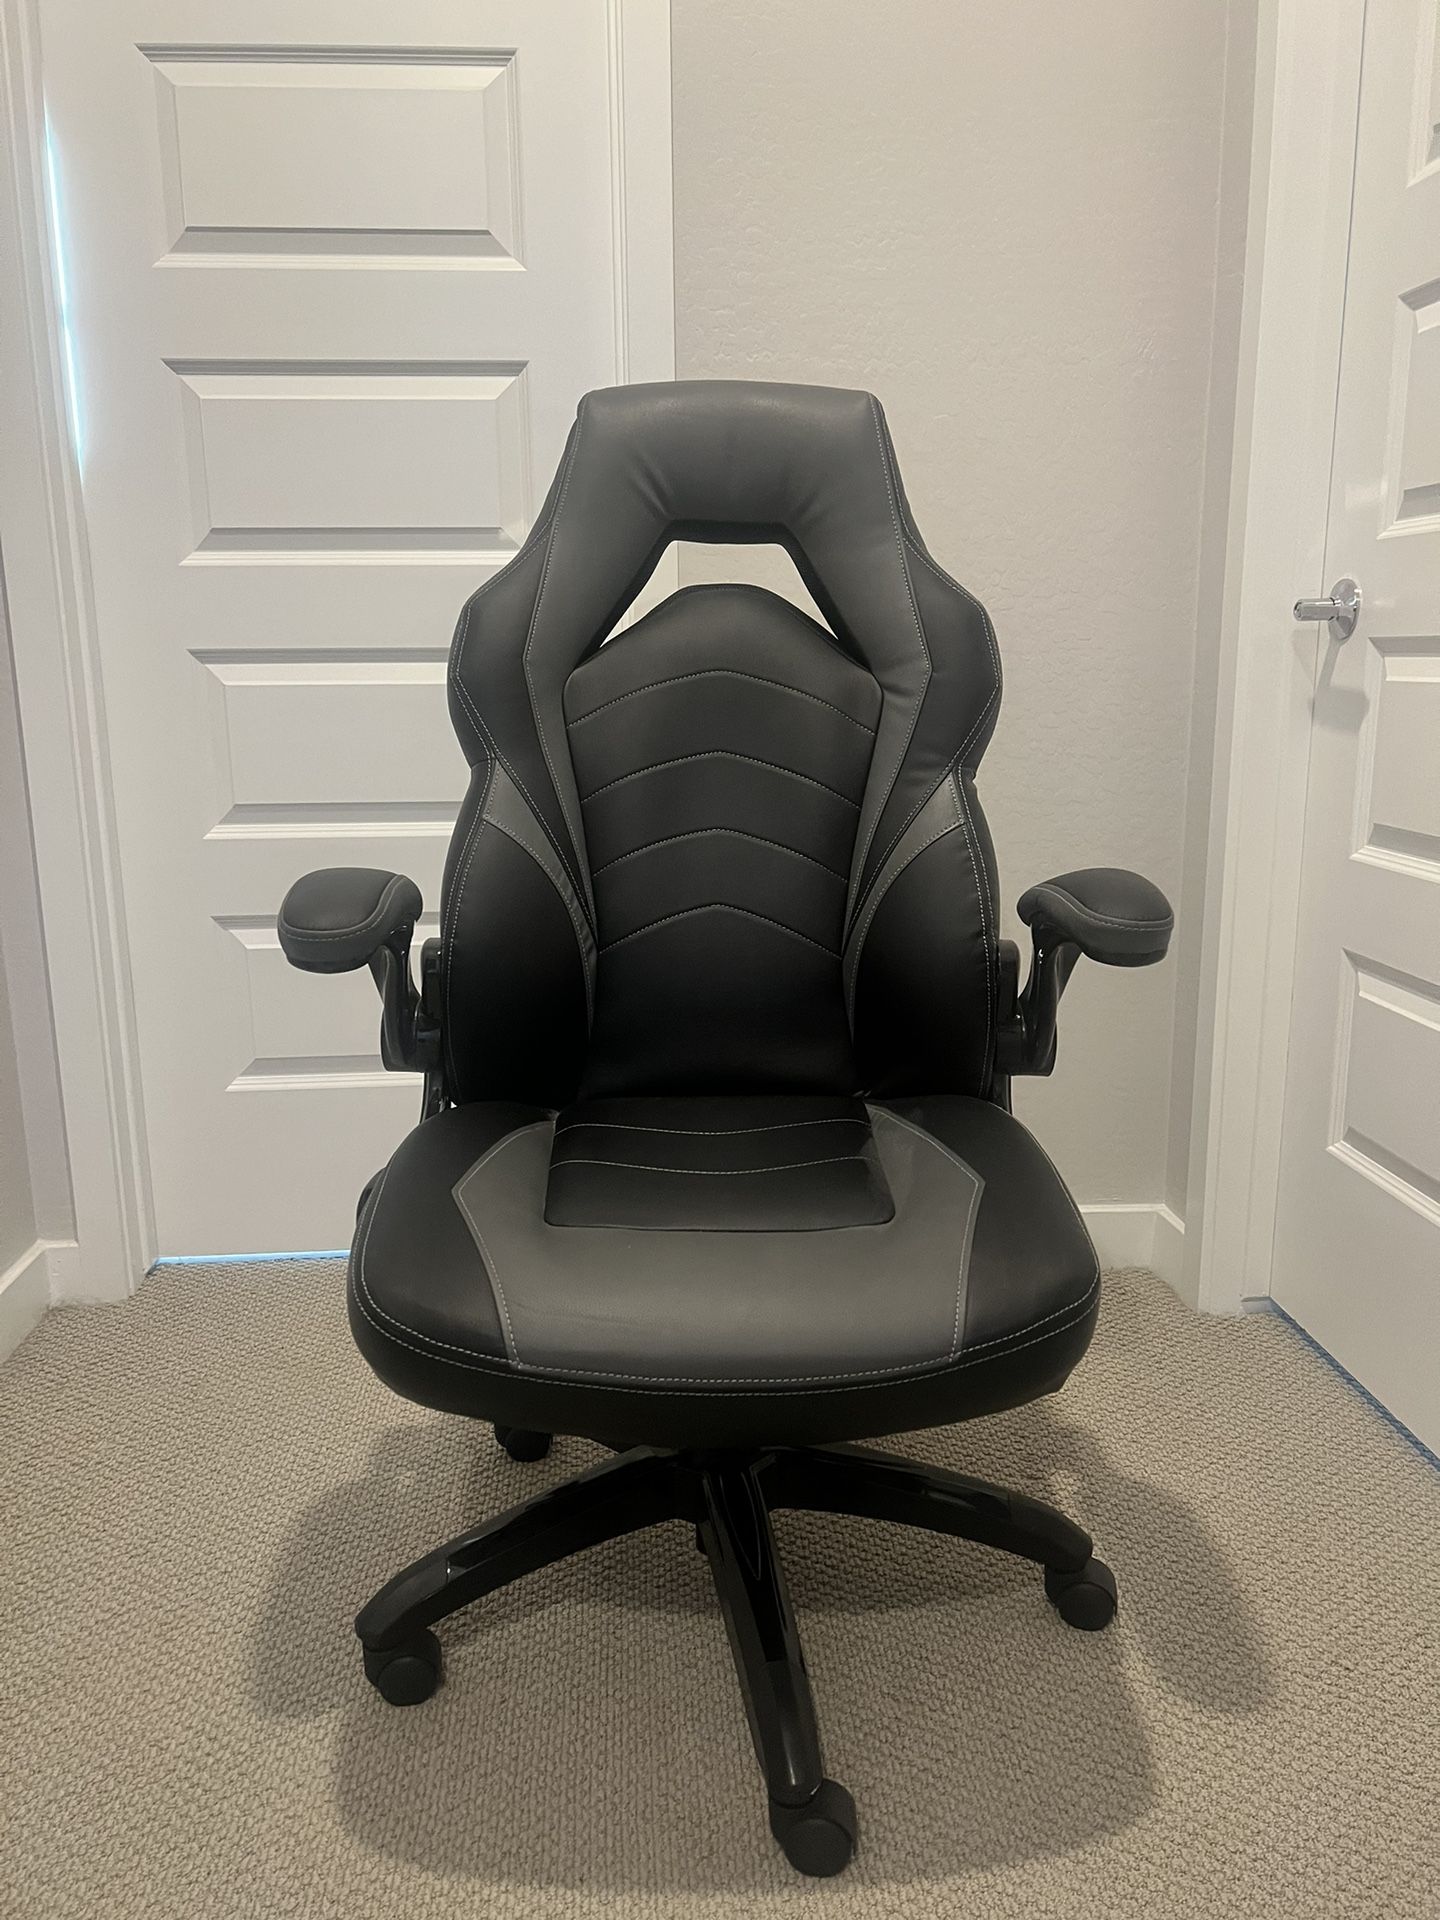 Office/Gaming Cushioned Chair